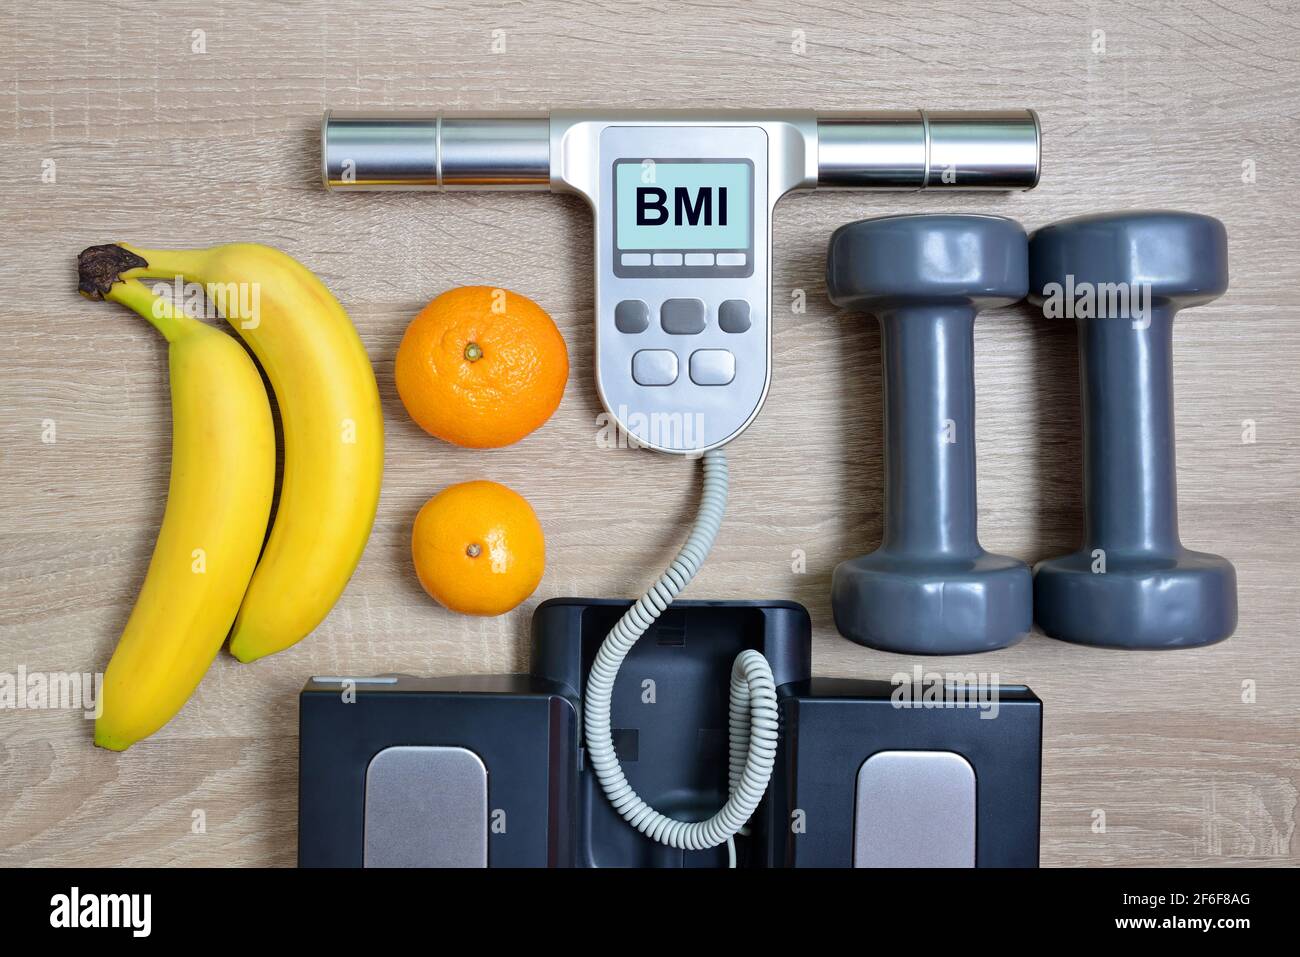 https://c8.alamy.com/comp/2F6F8AG/body-mass-index-scale-with-fruits-and-dumbbells-on-wooden-boardhealthy-lifestyle-concept-2F6F8AG.jpg